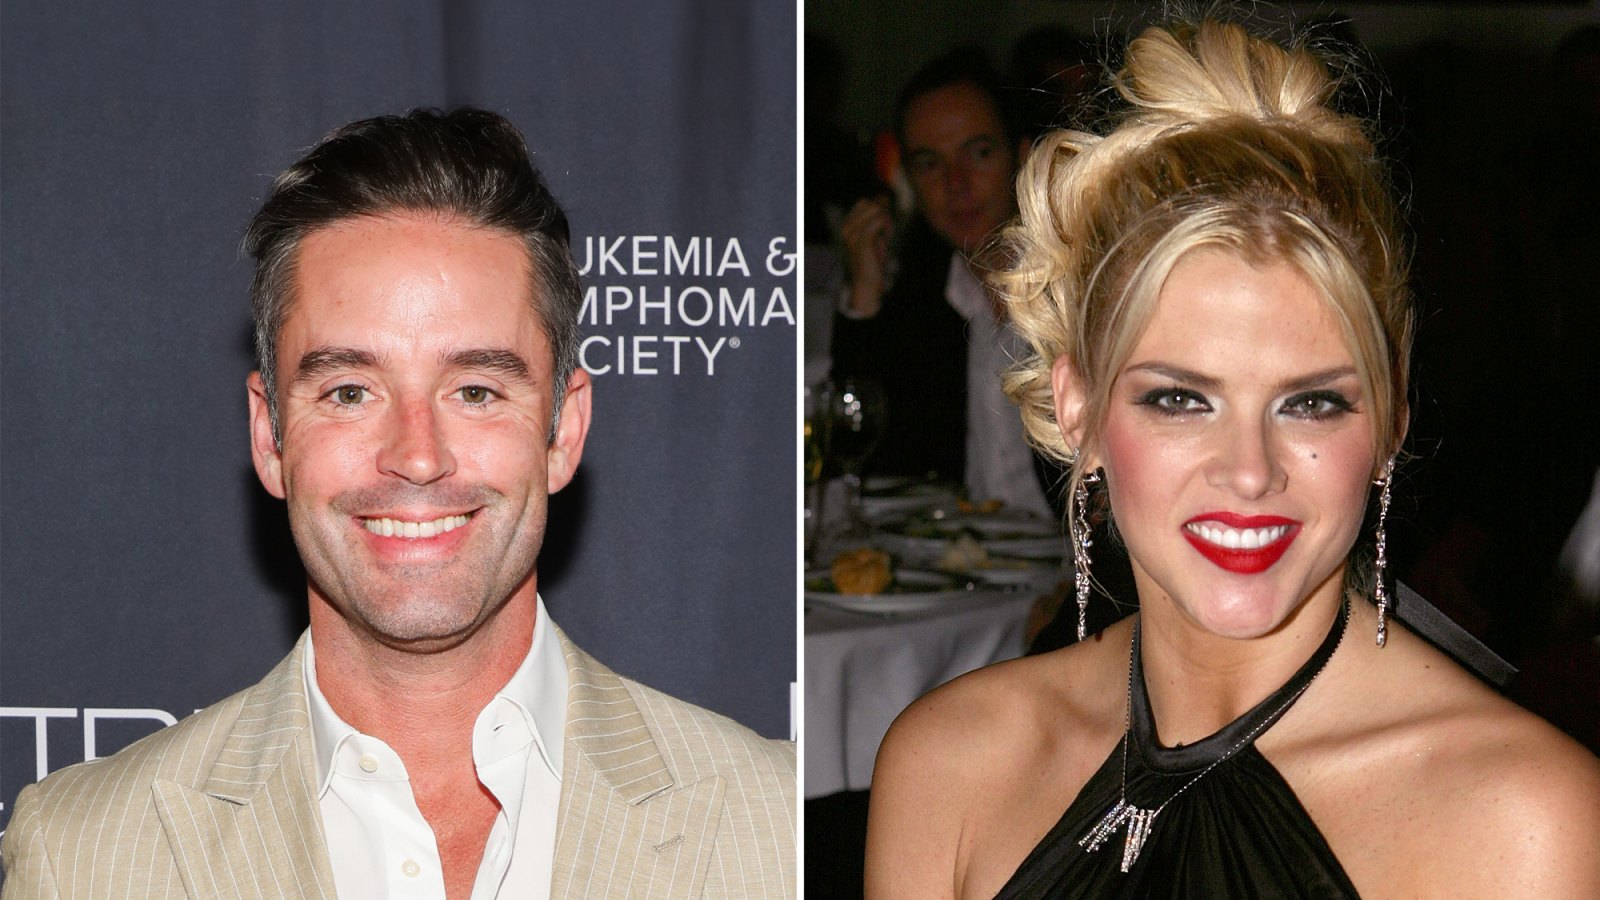 Jesse Lally Reveals His Surprising Past With Anna Nicole Smith